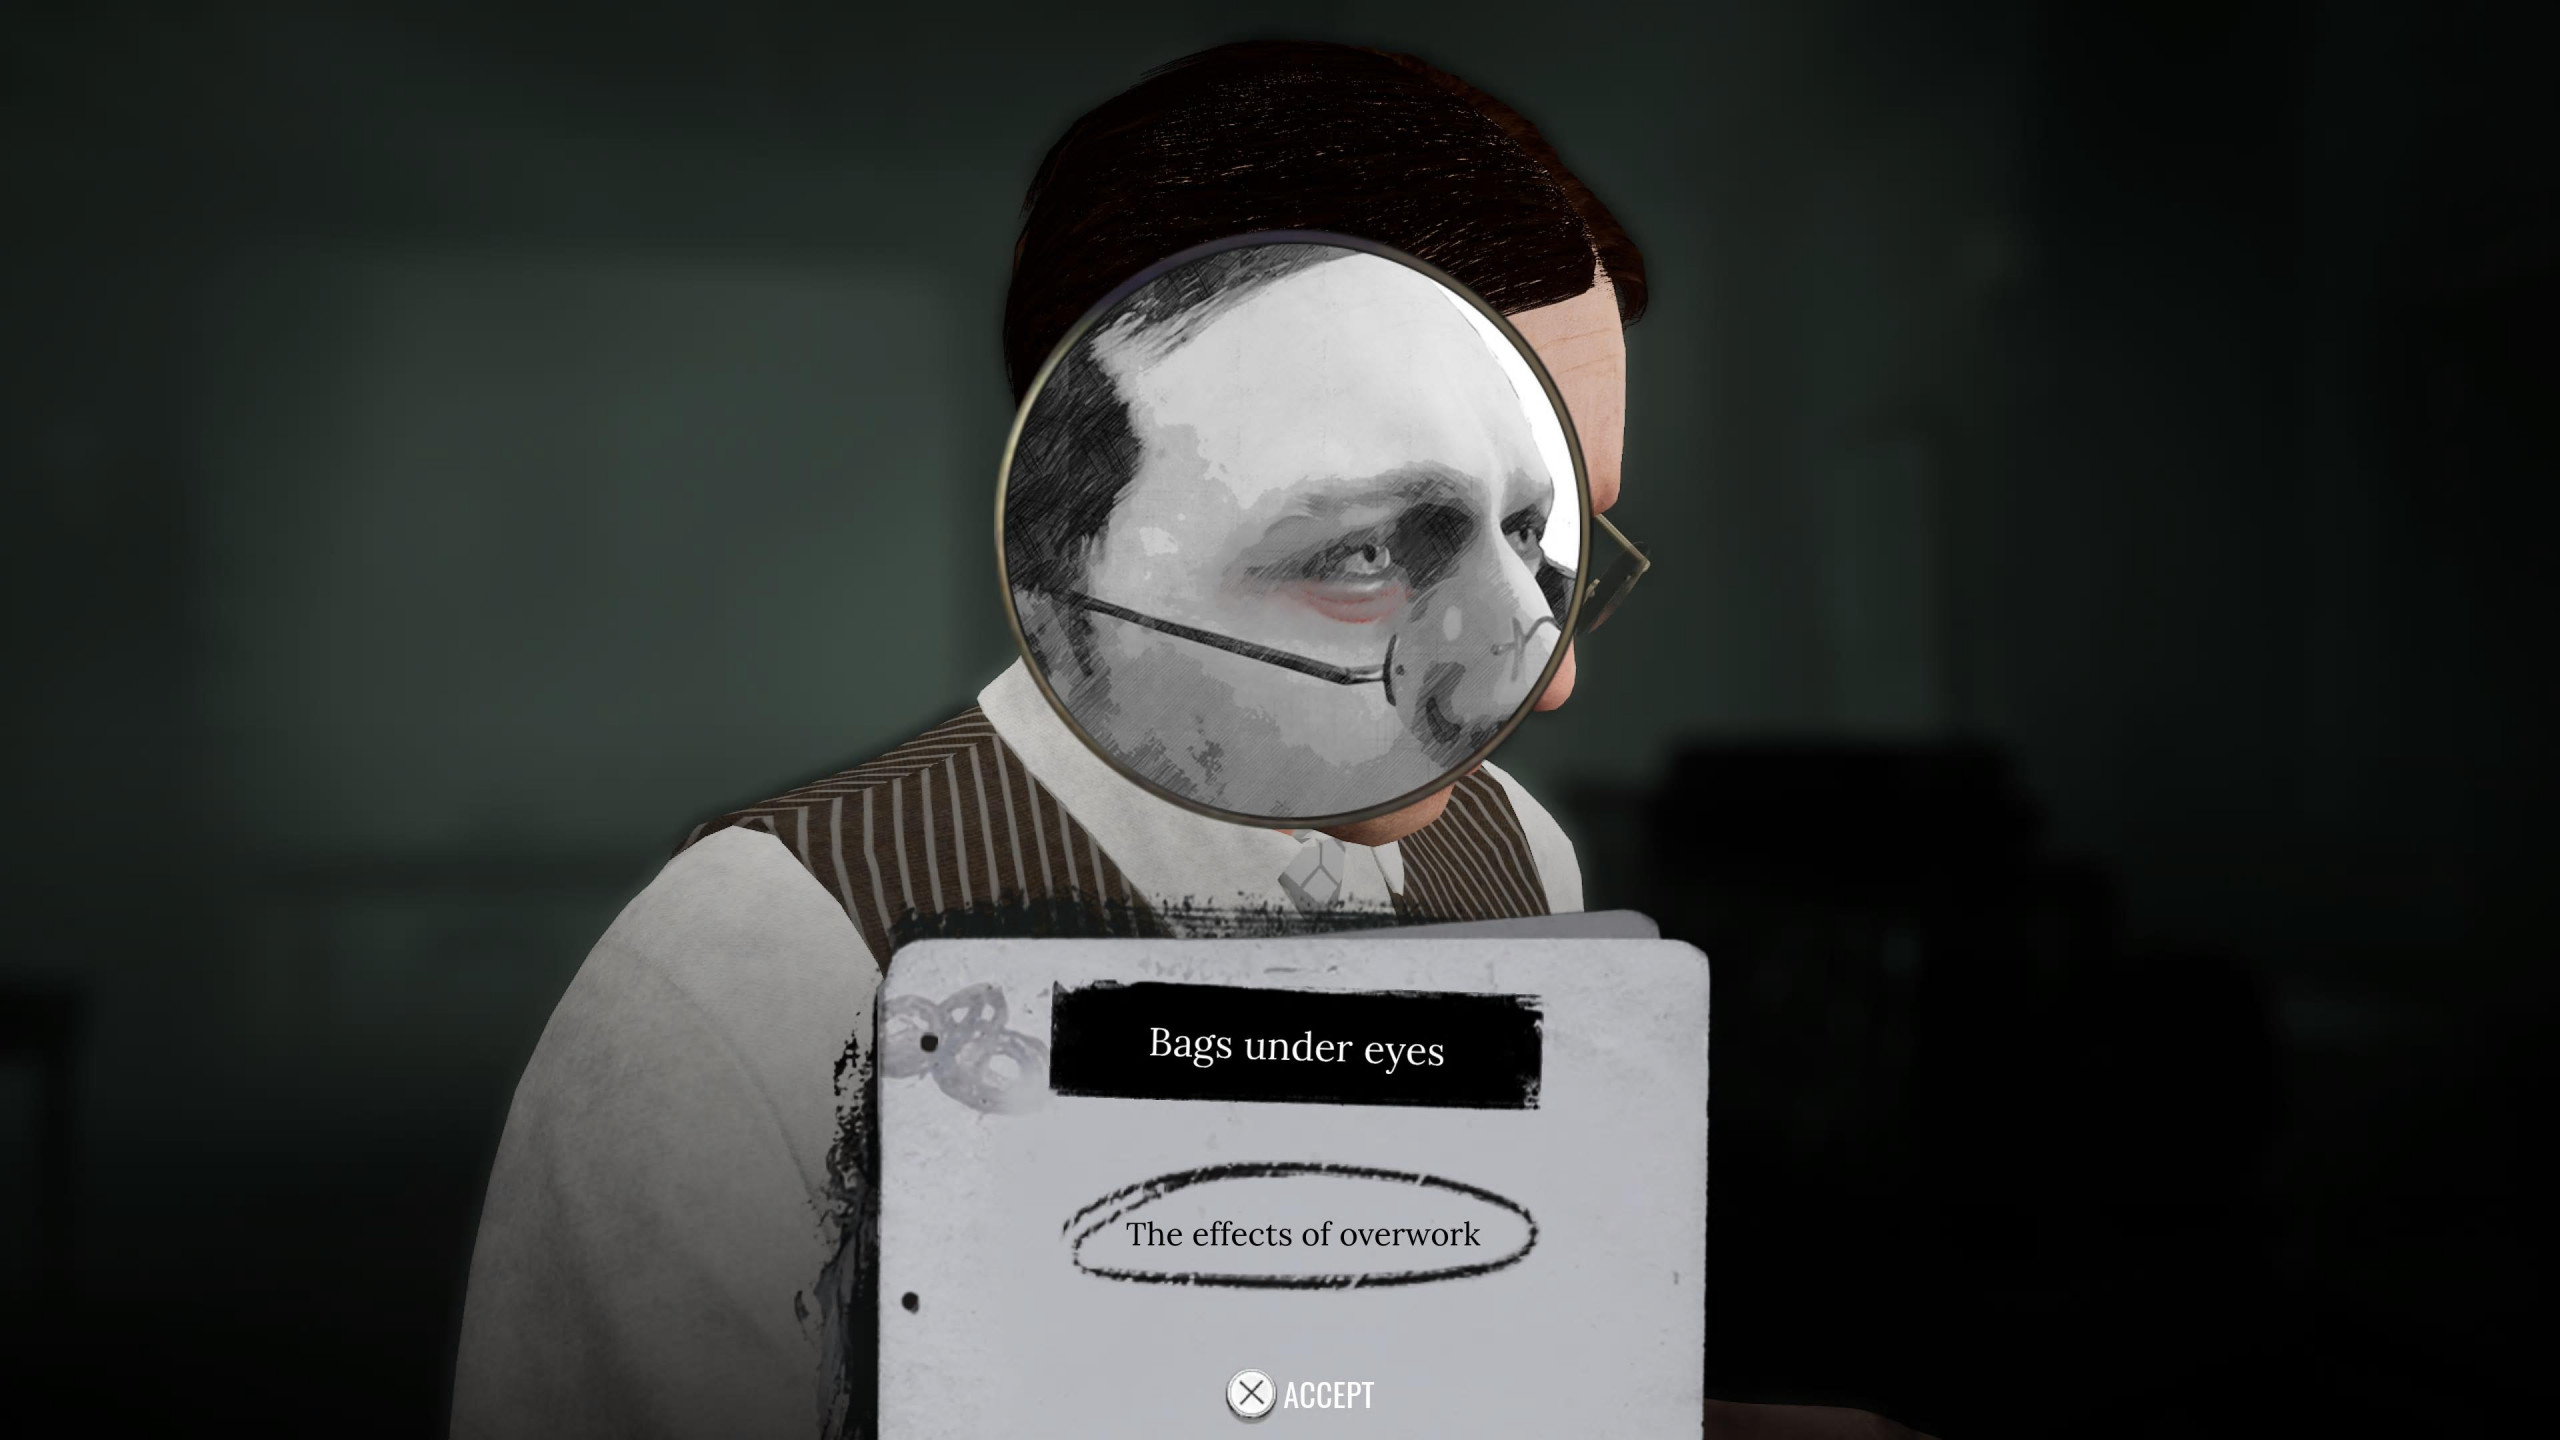 Observation mode shows a male character.There is an overlay looking at his eyes and showing the bags under them,